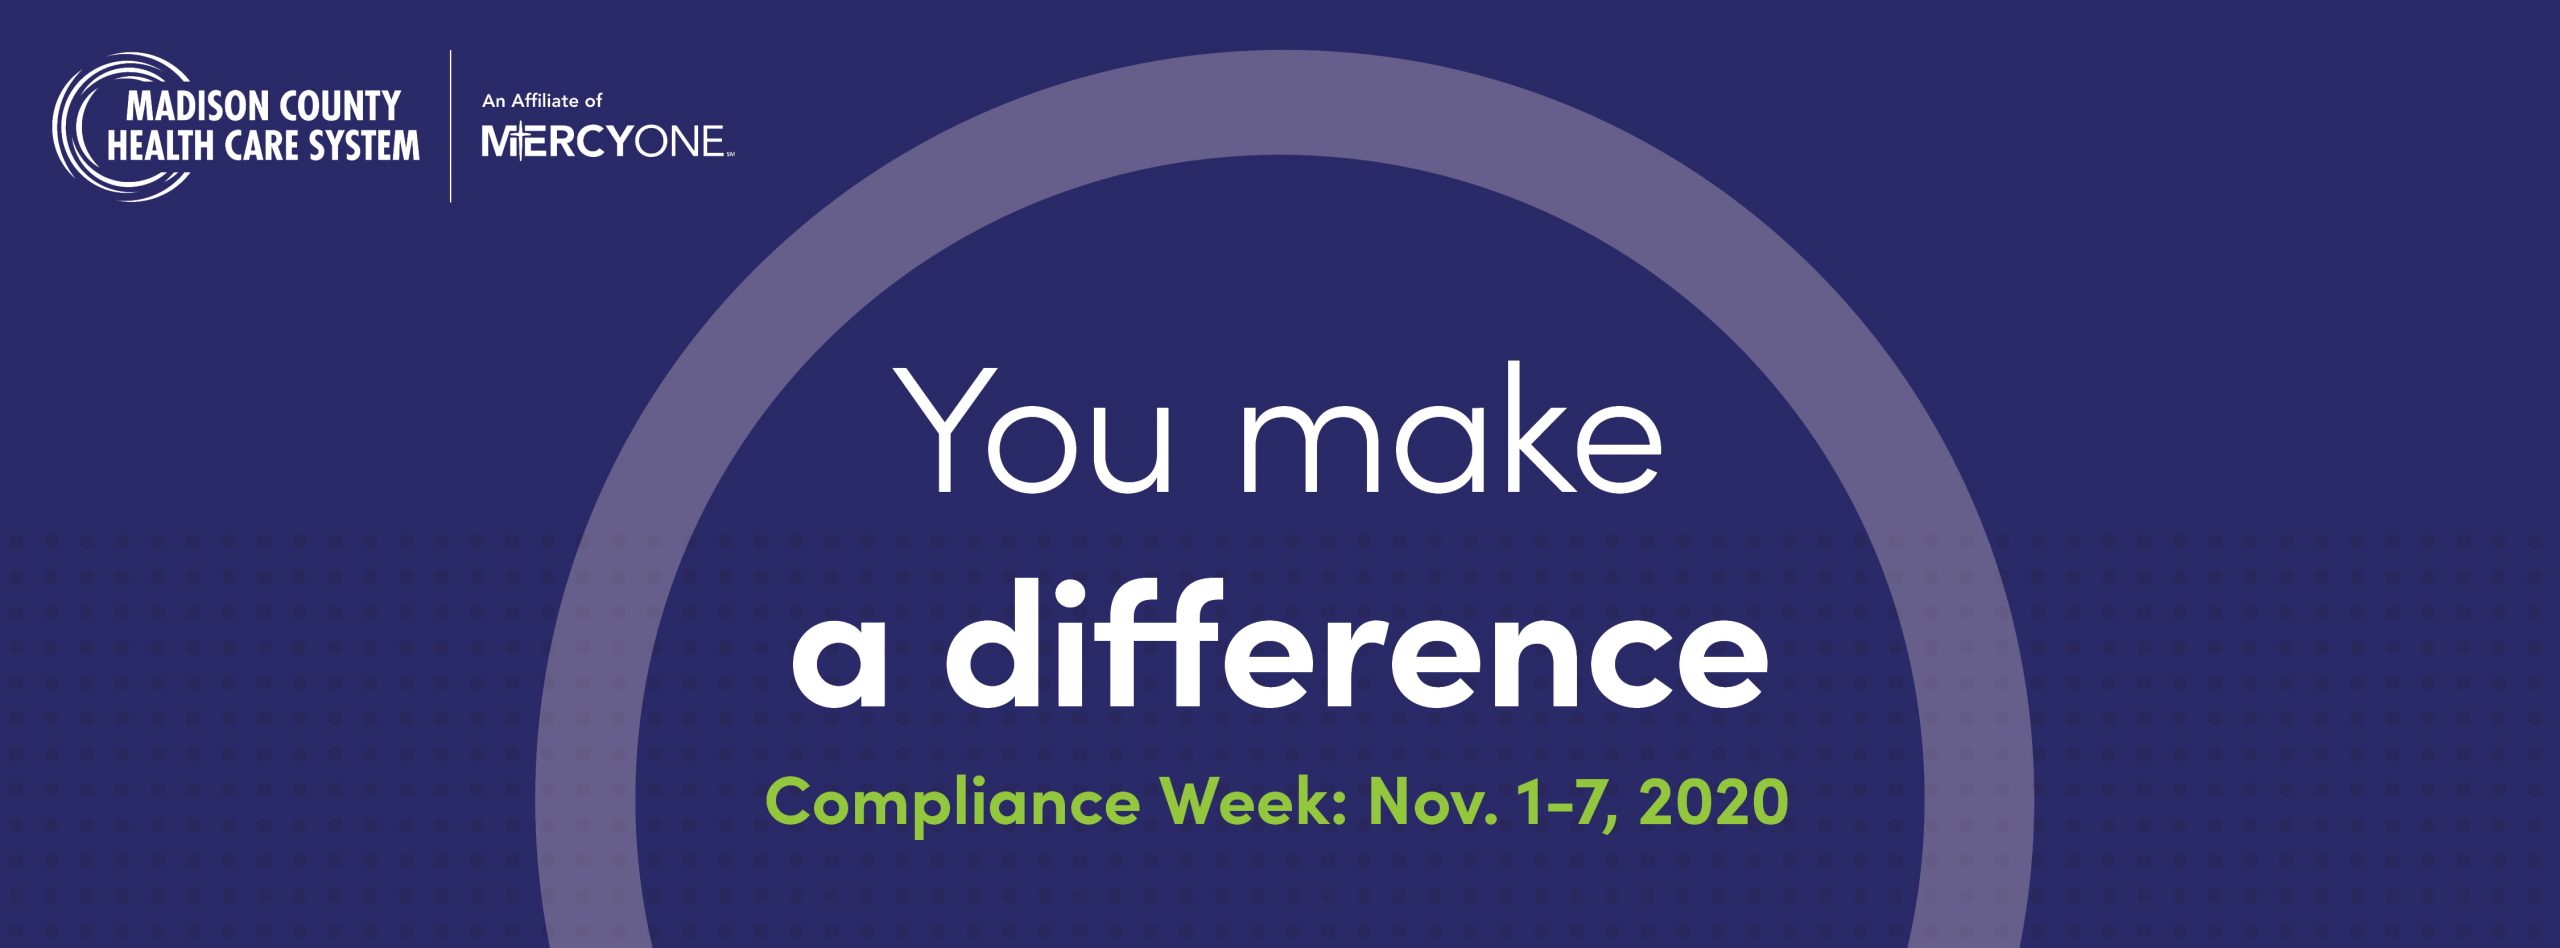 Compliance Week November 17 Madison County Health Care System